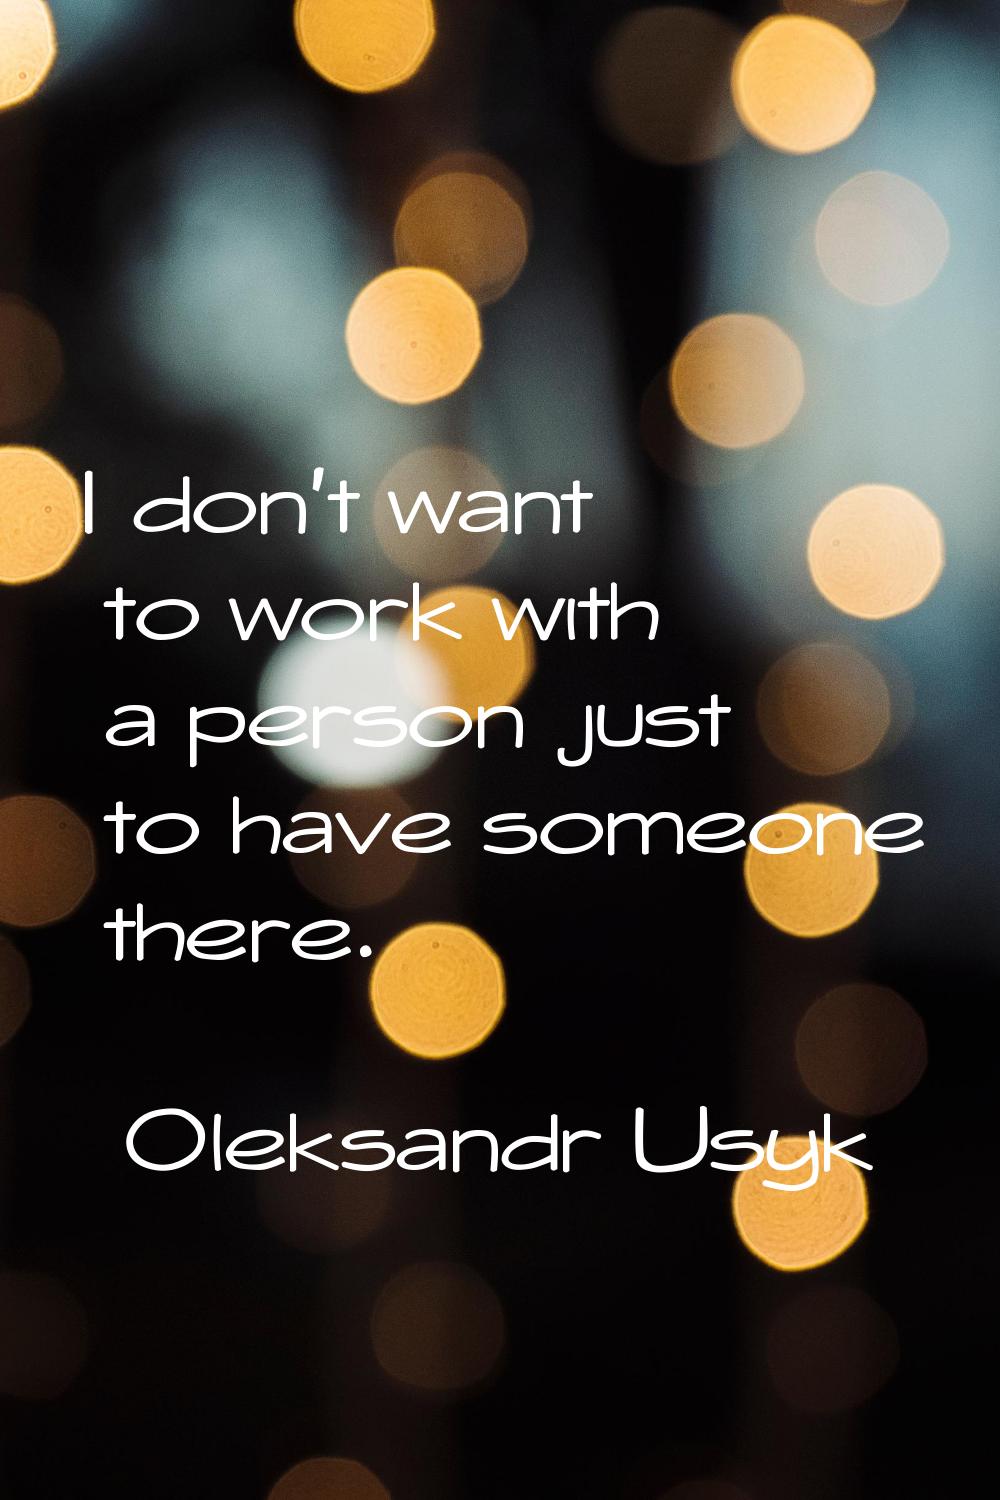 I don't want to work with a person just to have someone there.